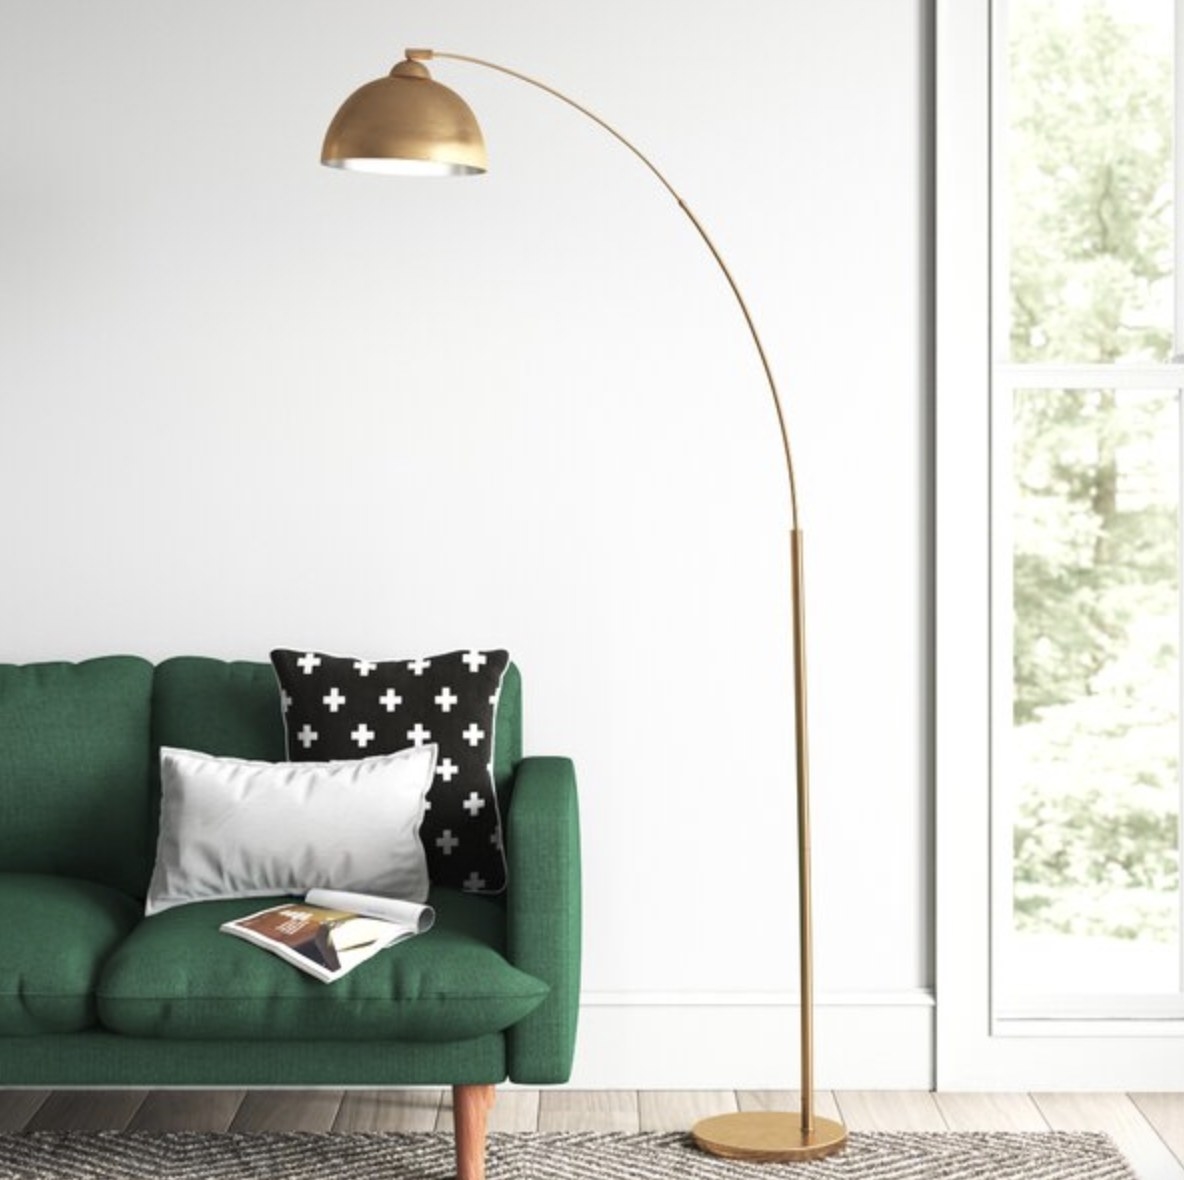 The arching gold lamp is tall and curving over a green couch